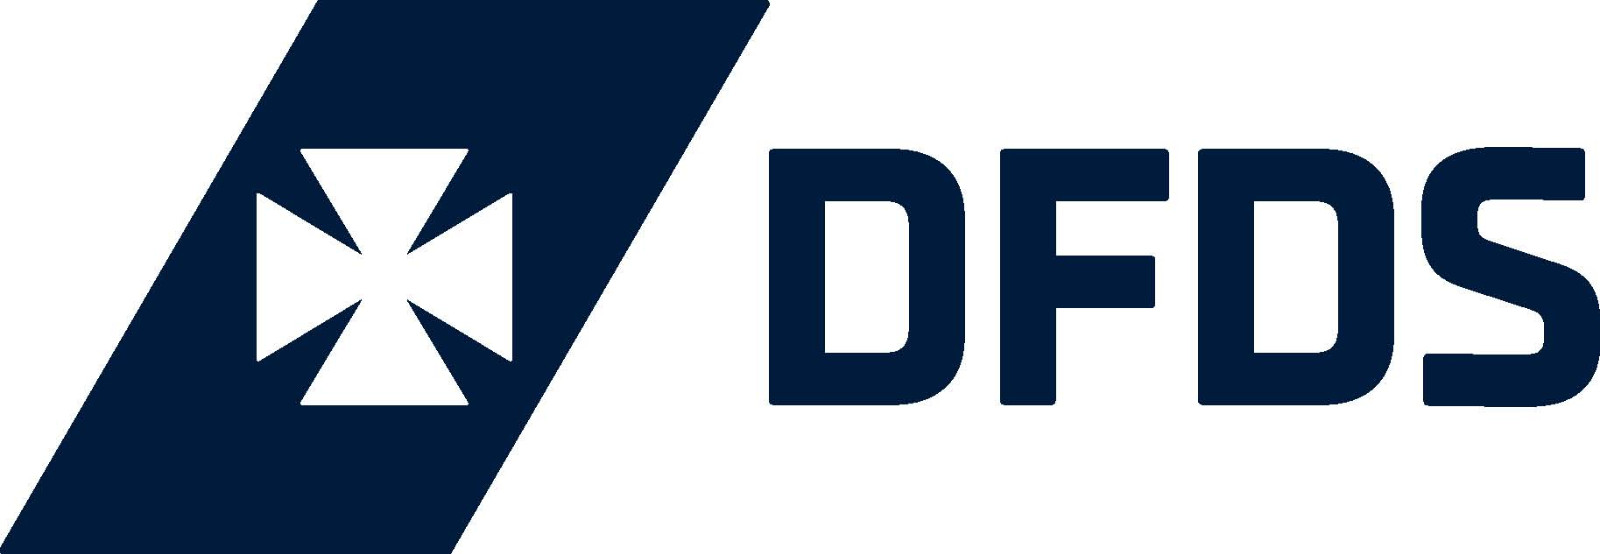 DFDS A/S